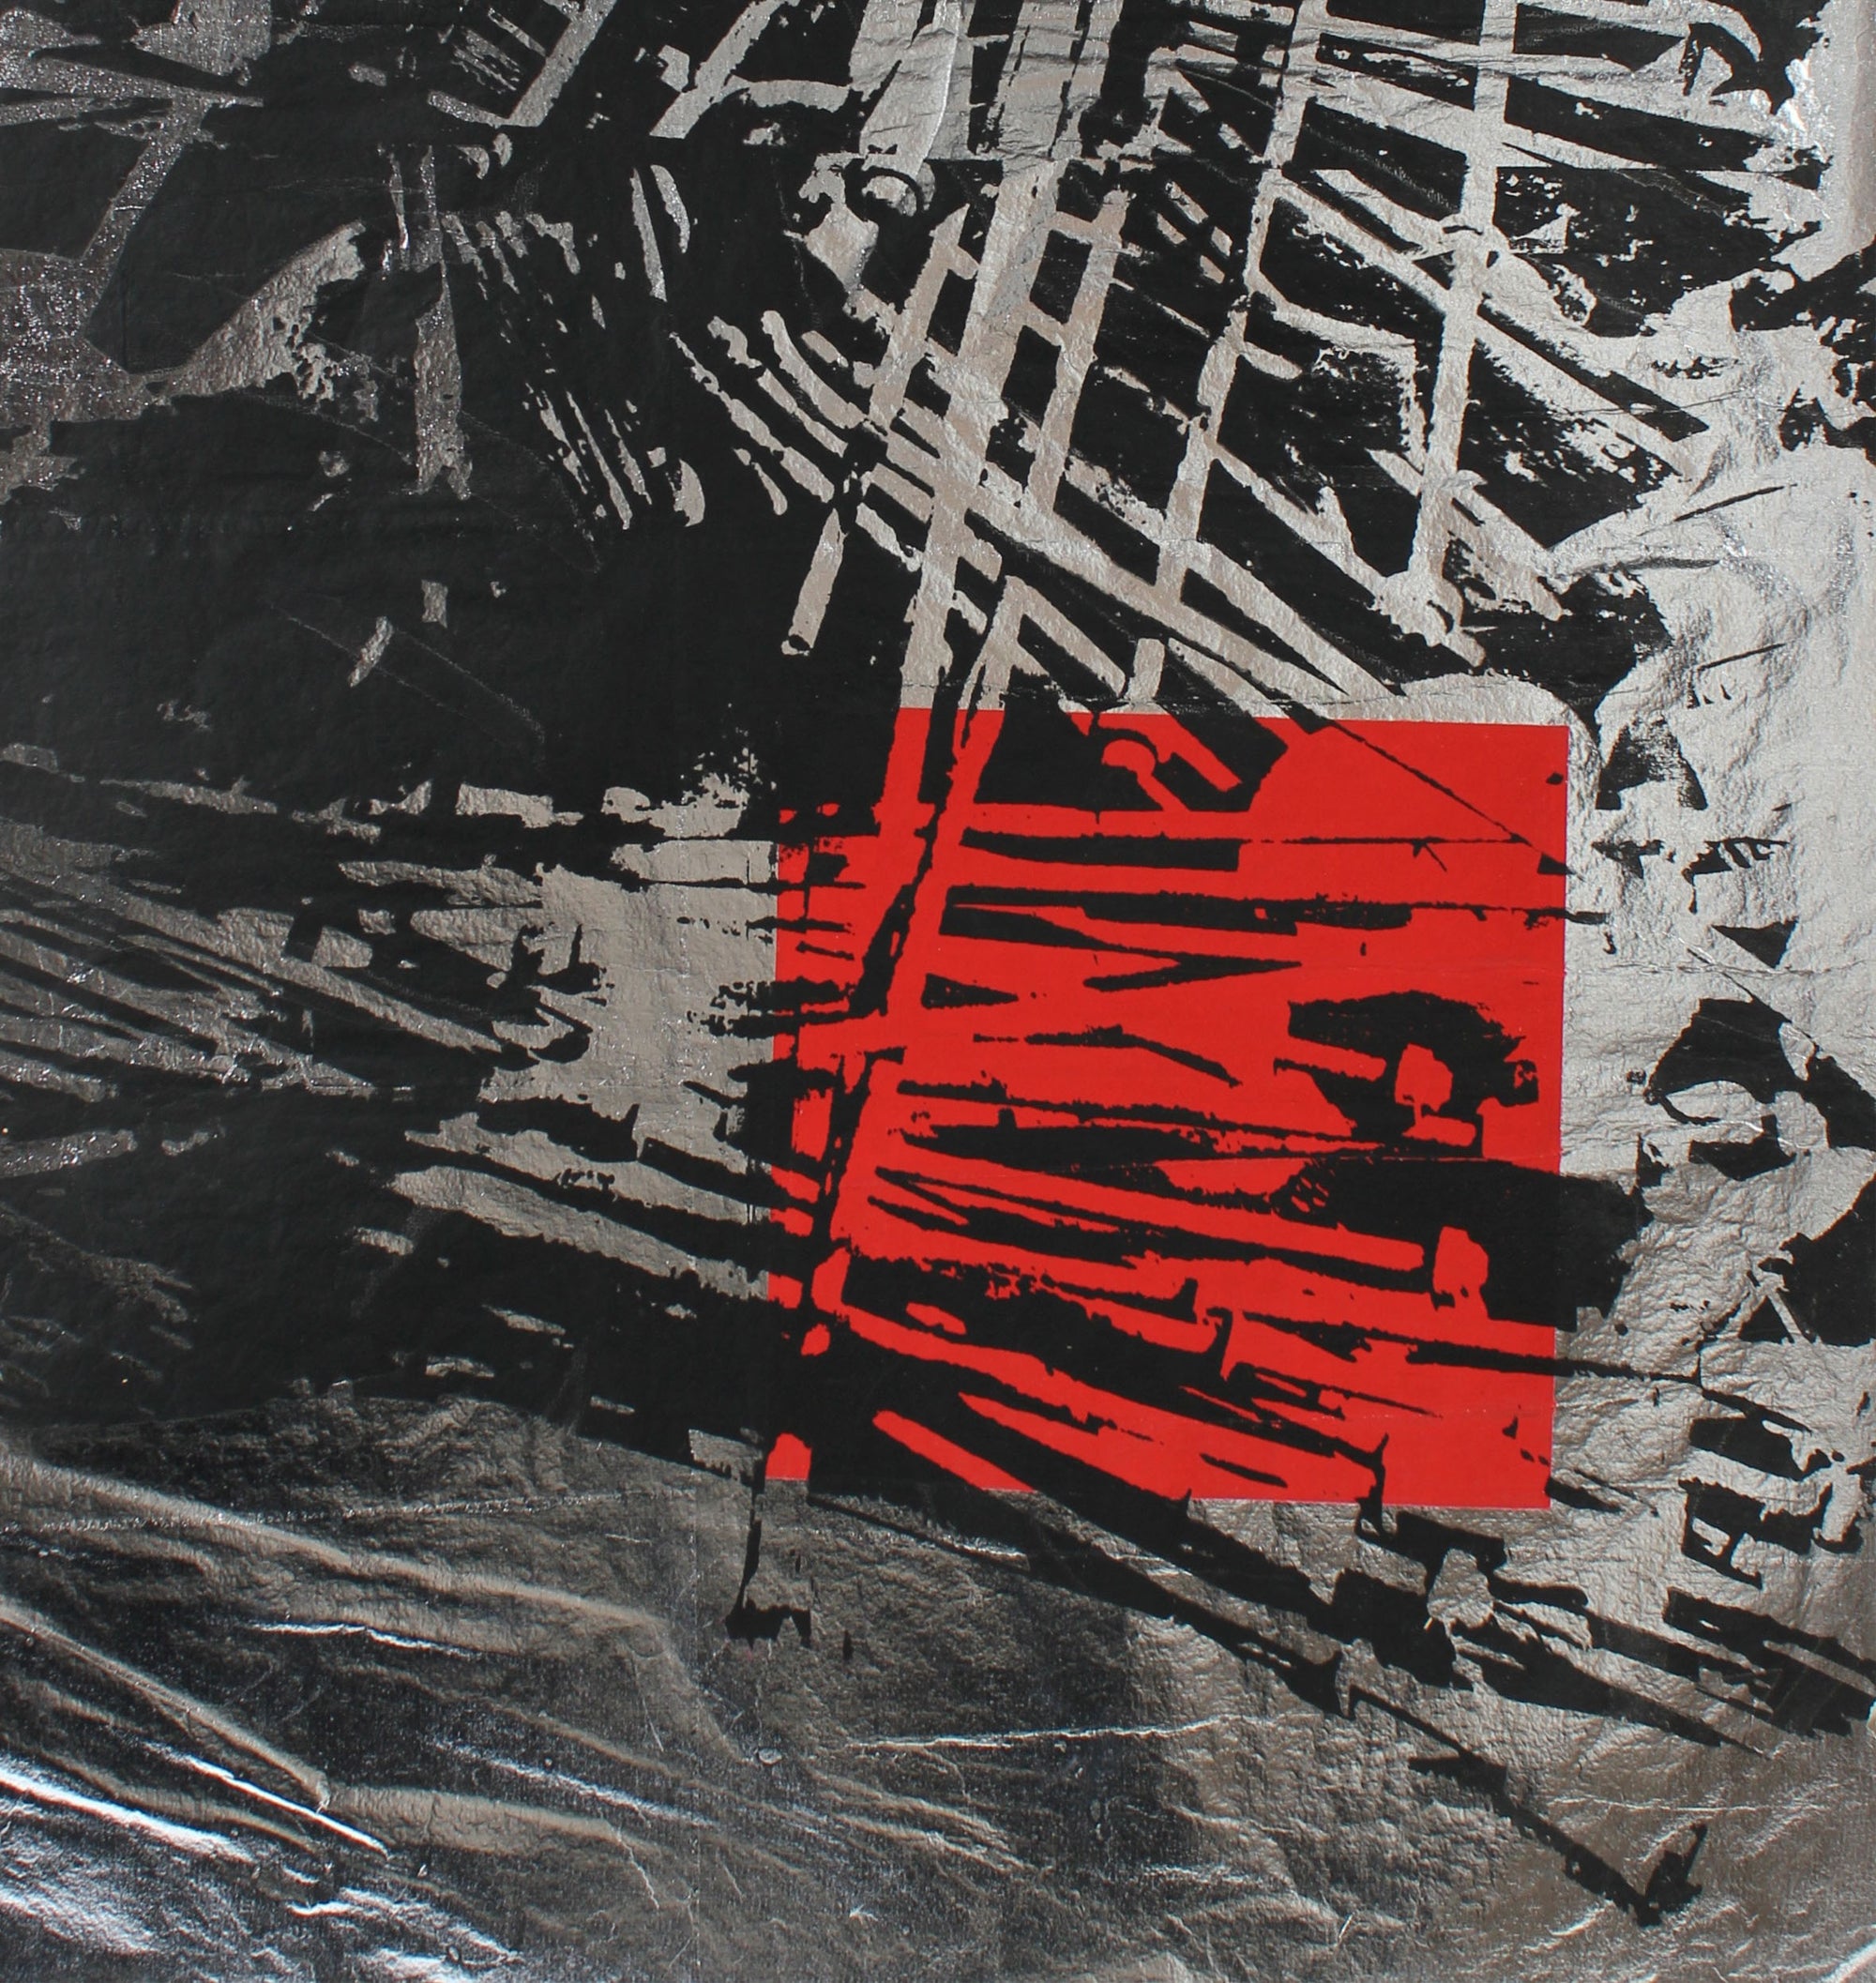 Monochromatic Abstract With Red Square Detail <br>1970s Serigraph <br><br>#A0920